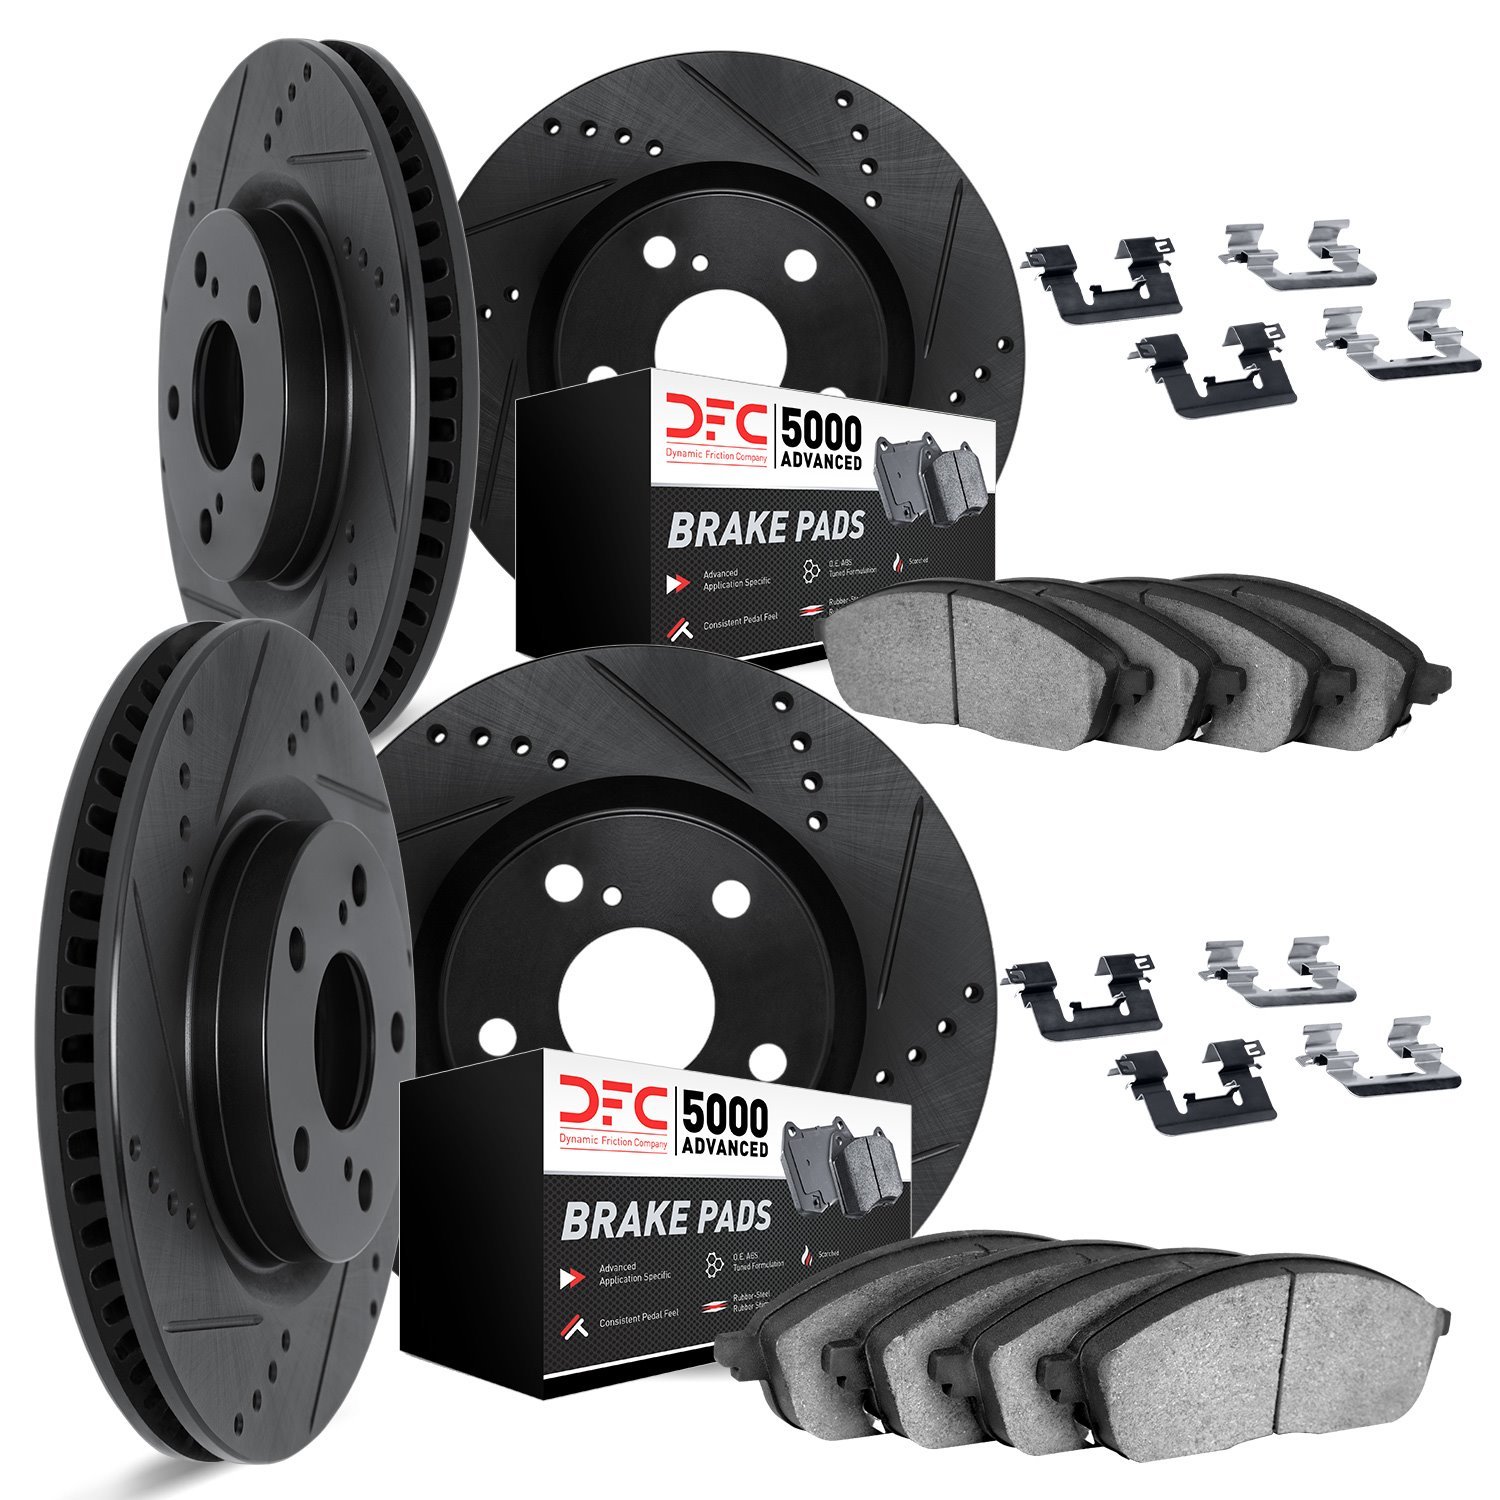 8514-31031 Drilled/Slotted Brake Rotors w/5000 Advanced Brake Pads Kit & Hardware [Black], 2010-2017 BMW, Position: Front and Re